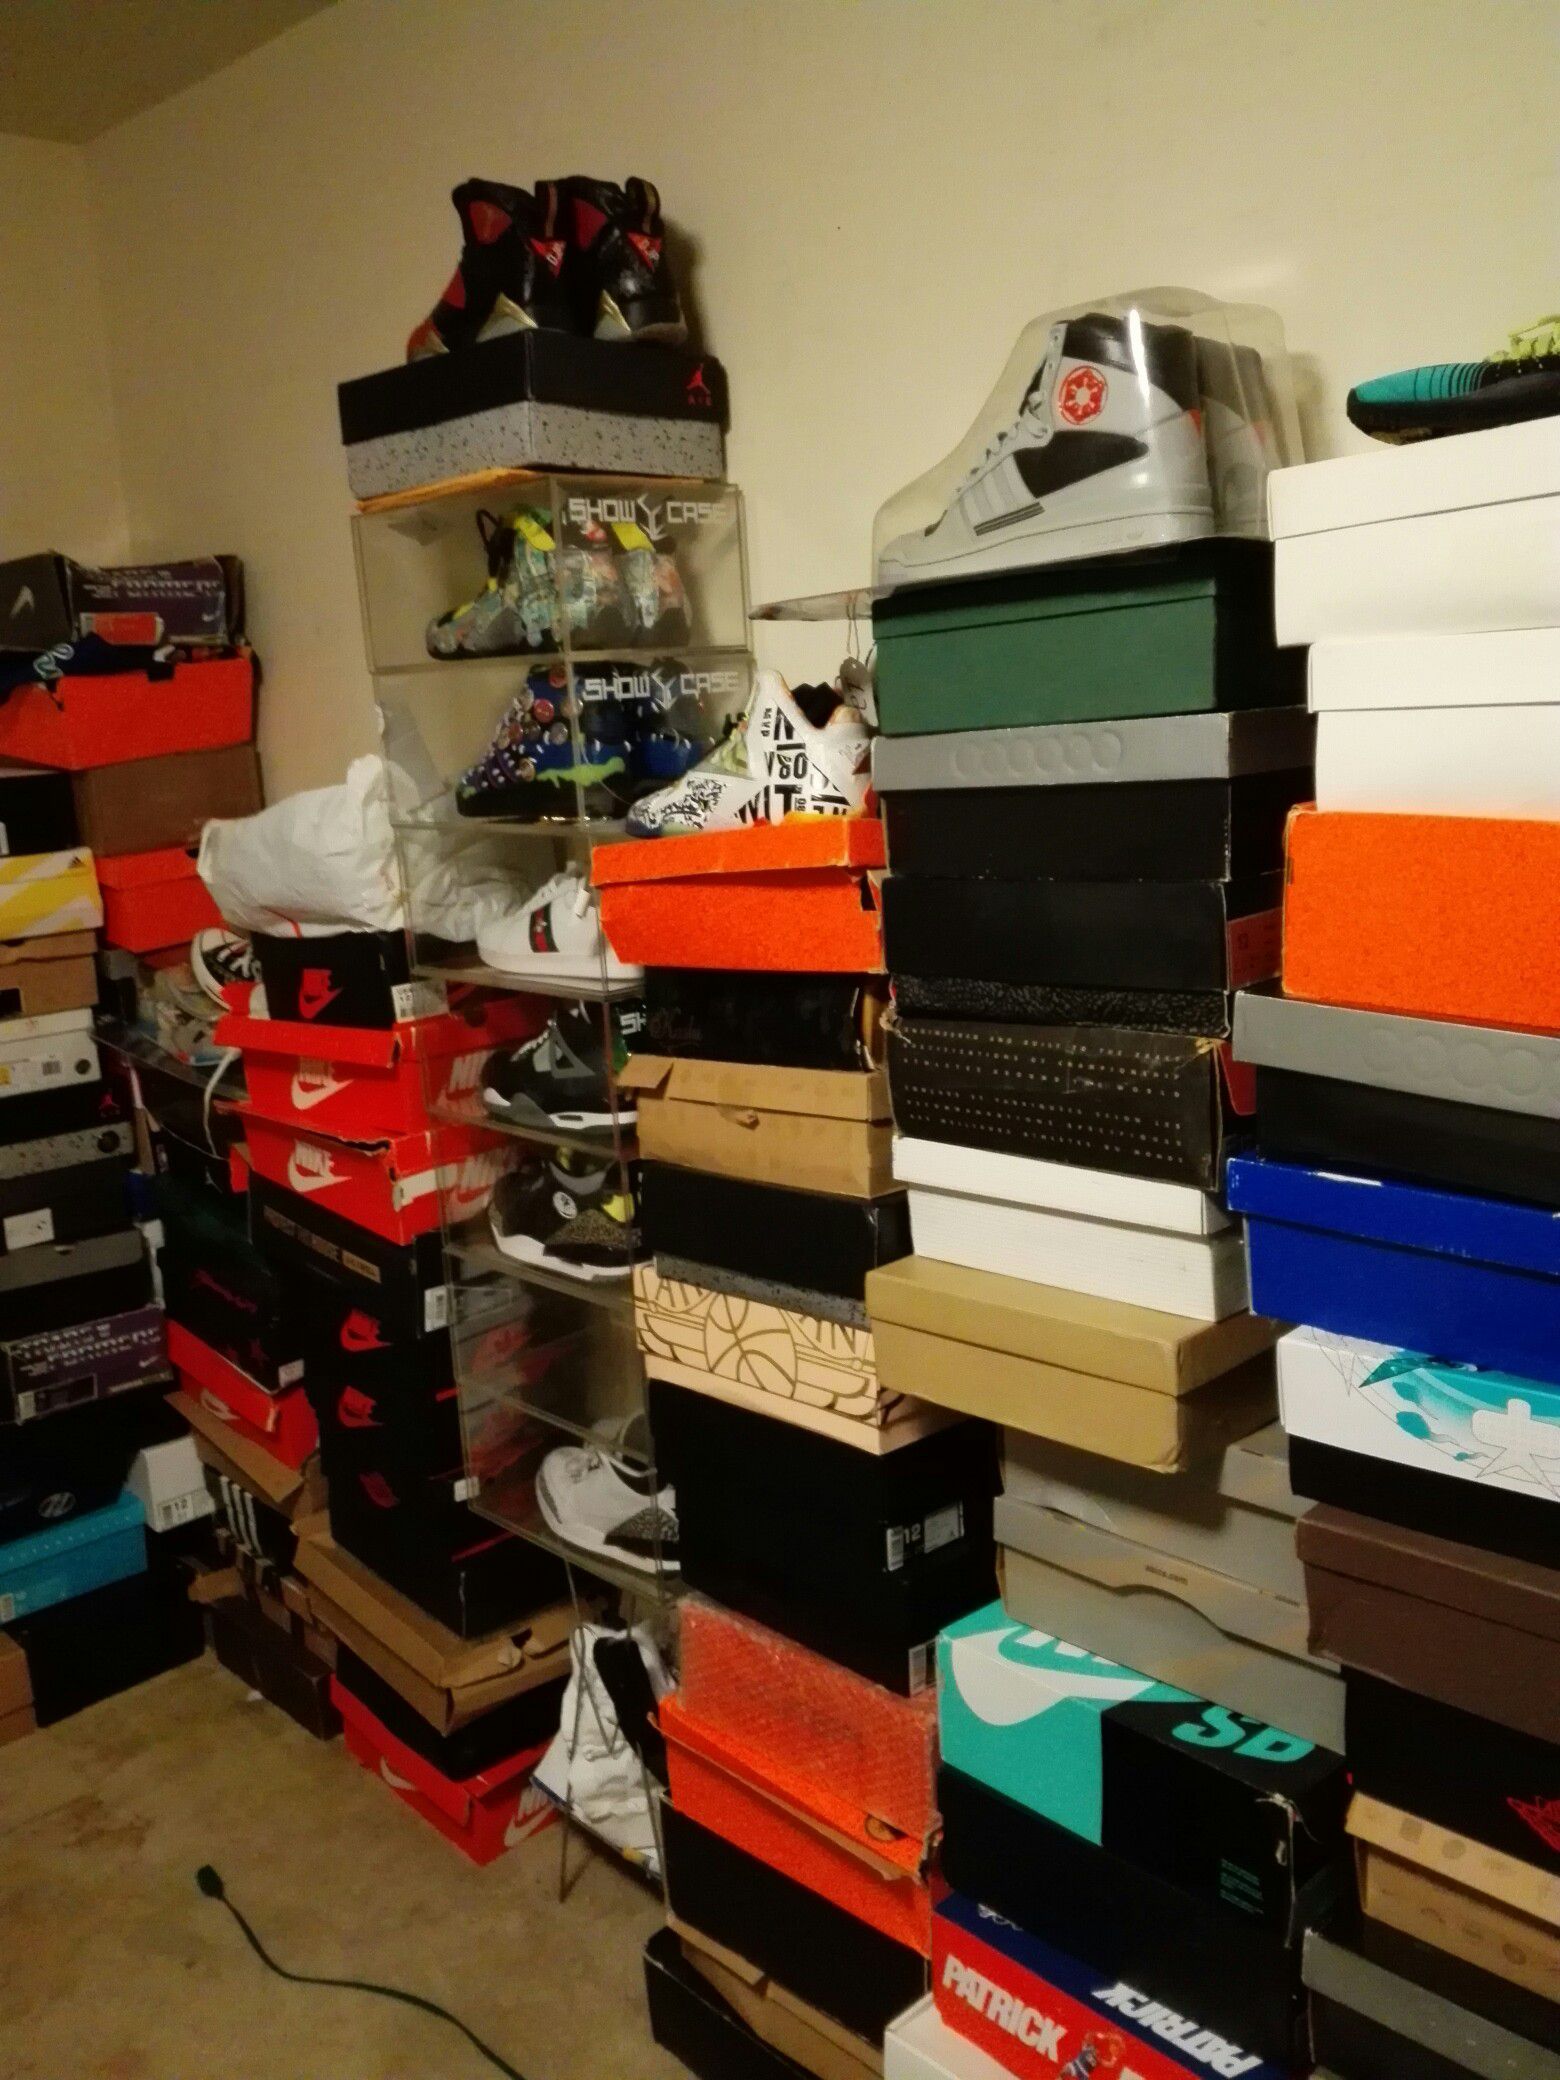 Check out my offers lot of kicks cheap